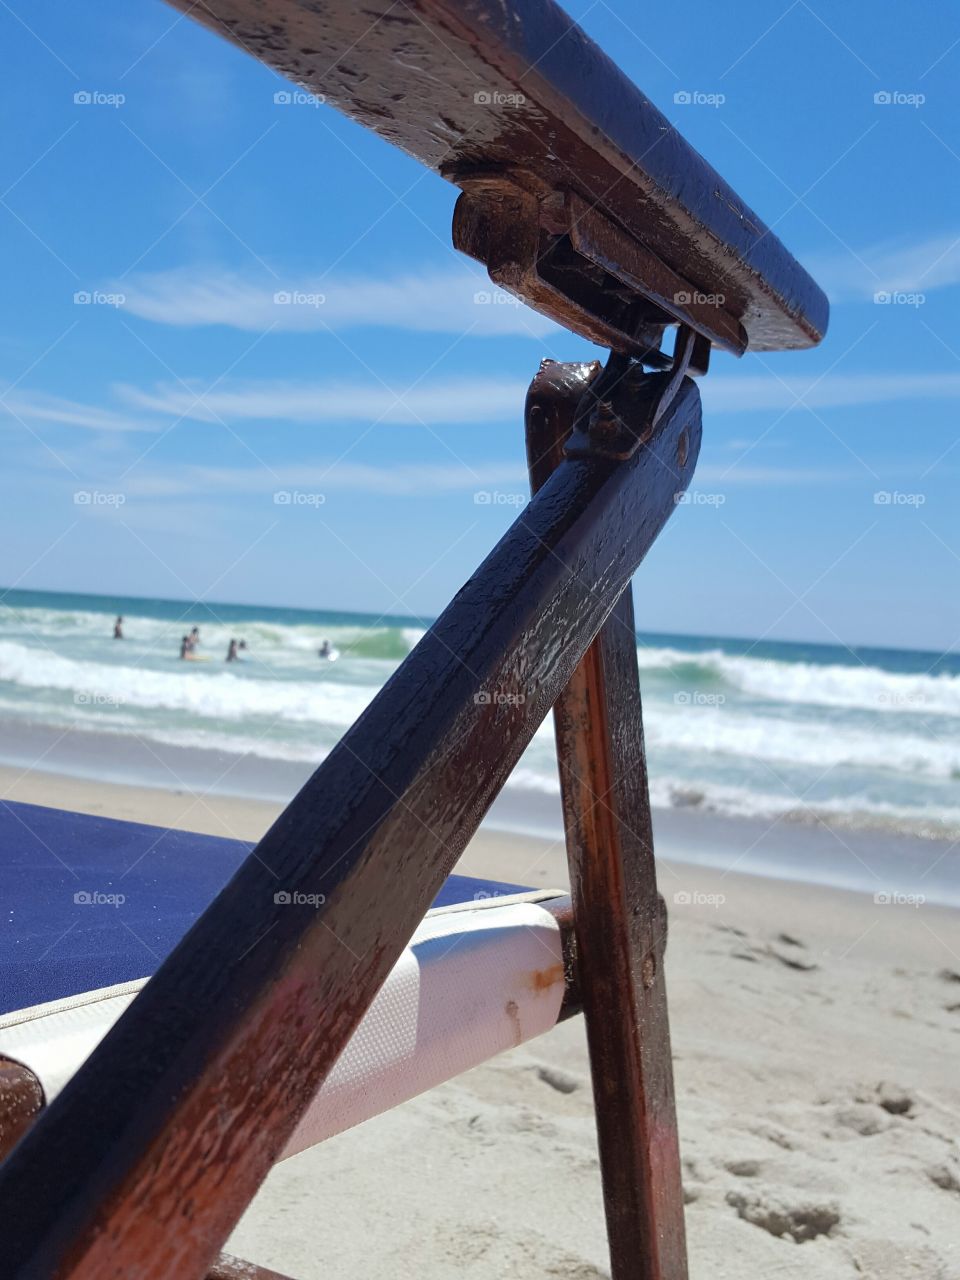 my point of view from my beach chair